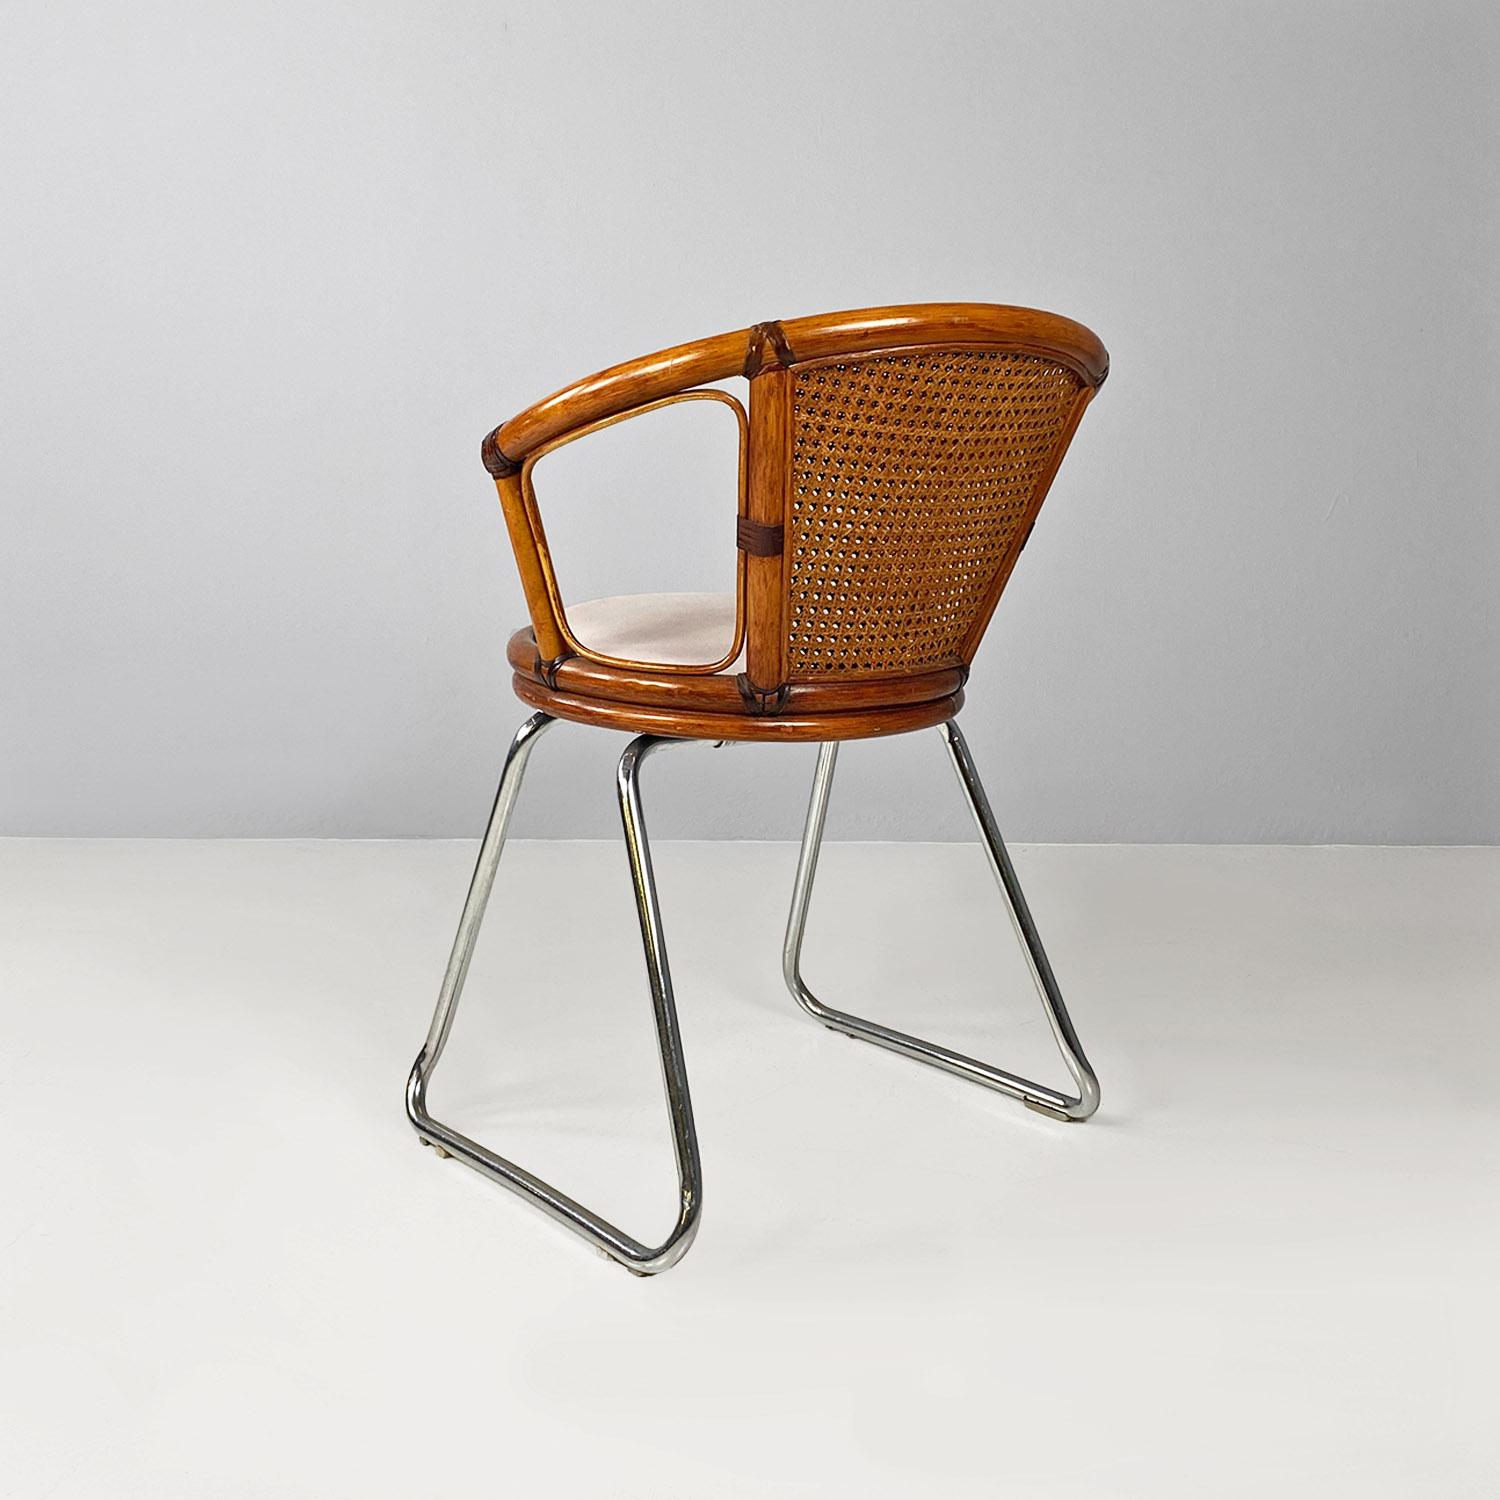 Steel Cockpit chair, modern Italian, made of vienna straw wood and steel, ca 1970s For Sale